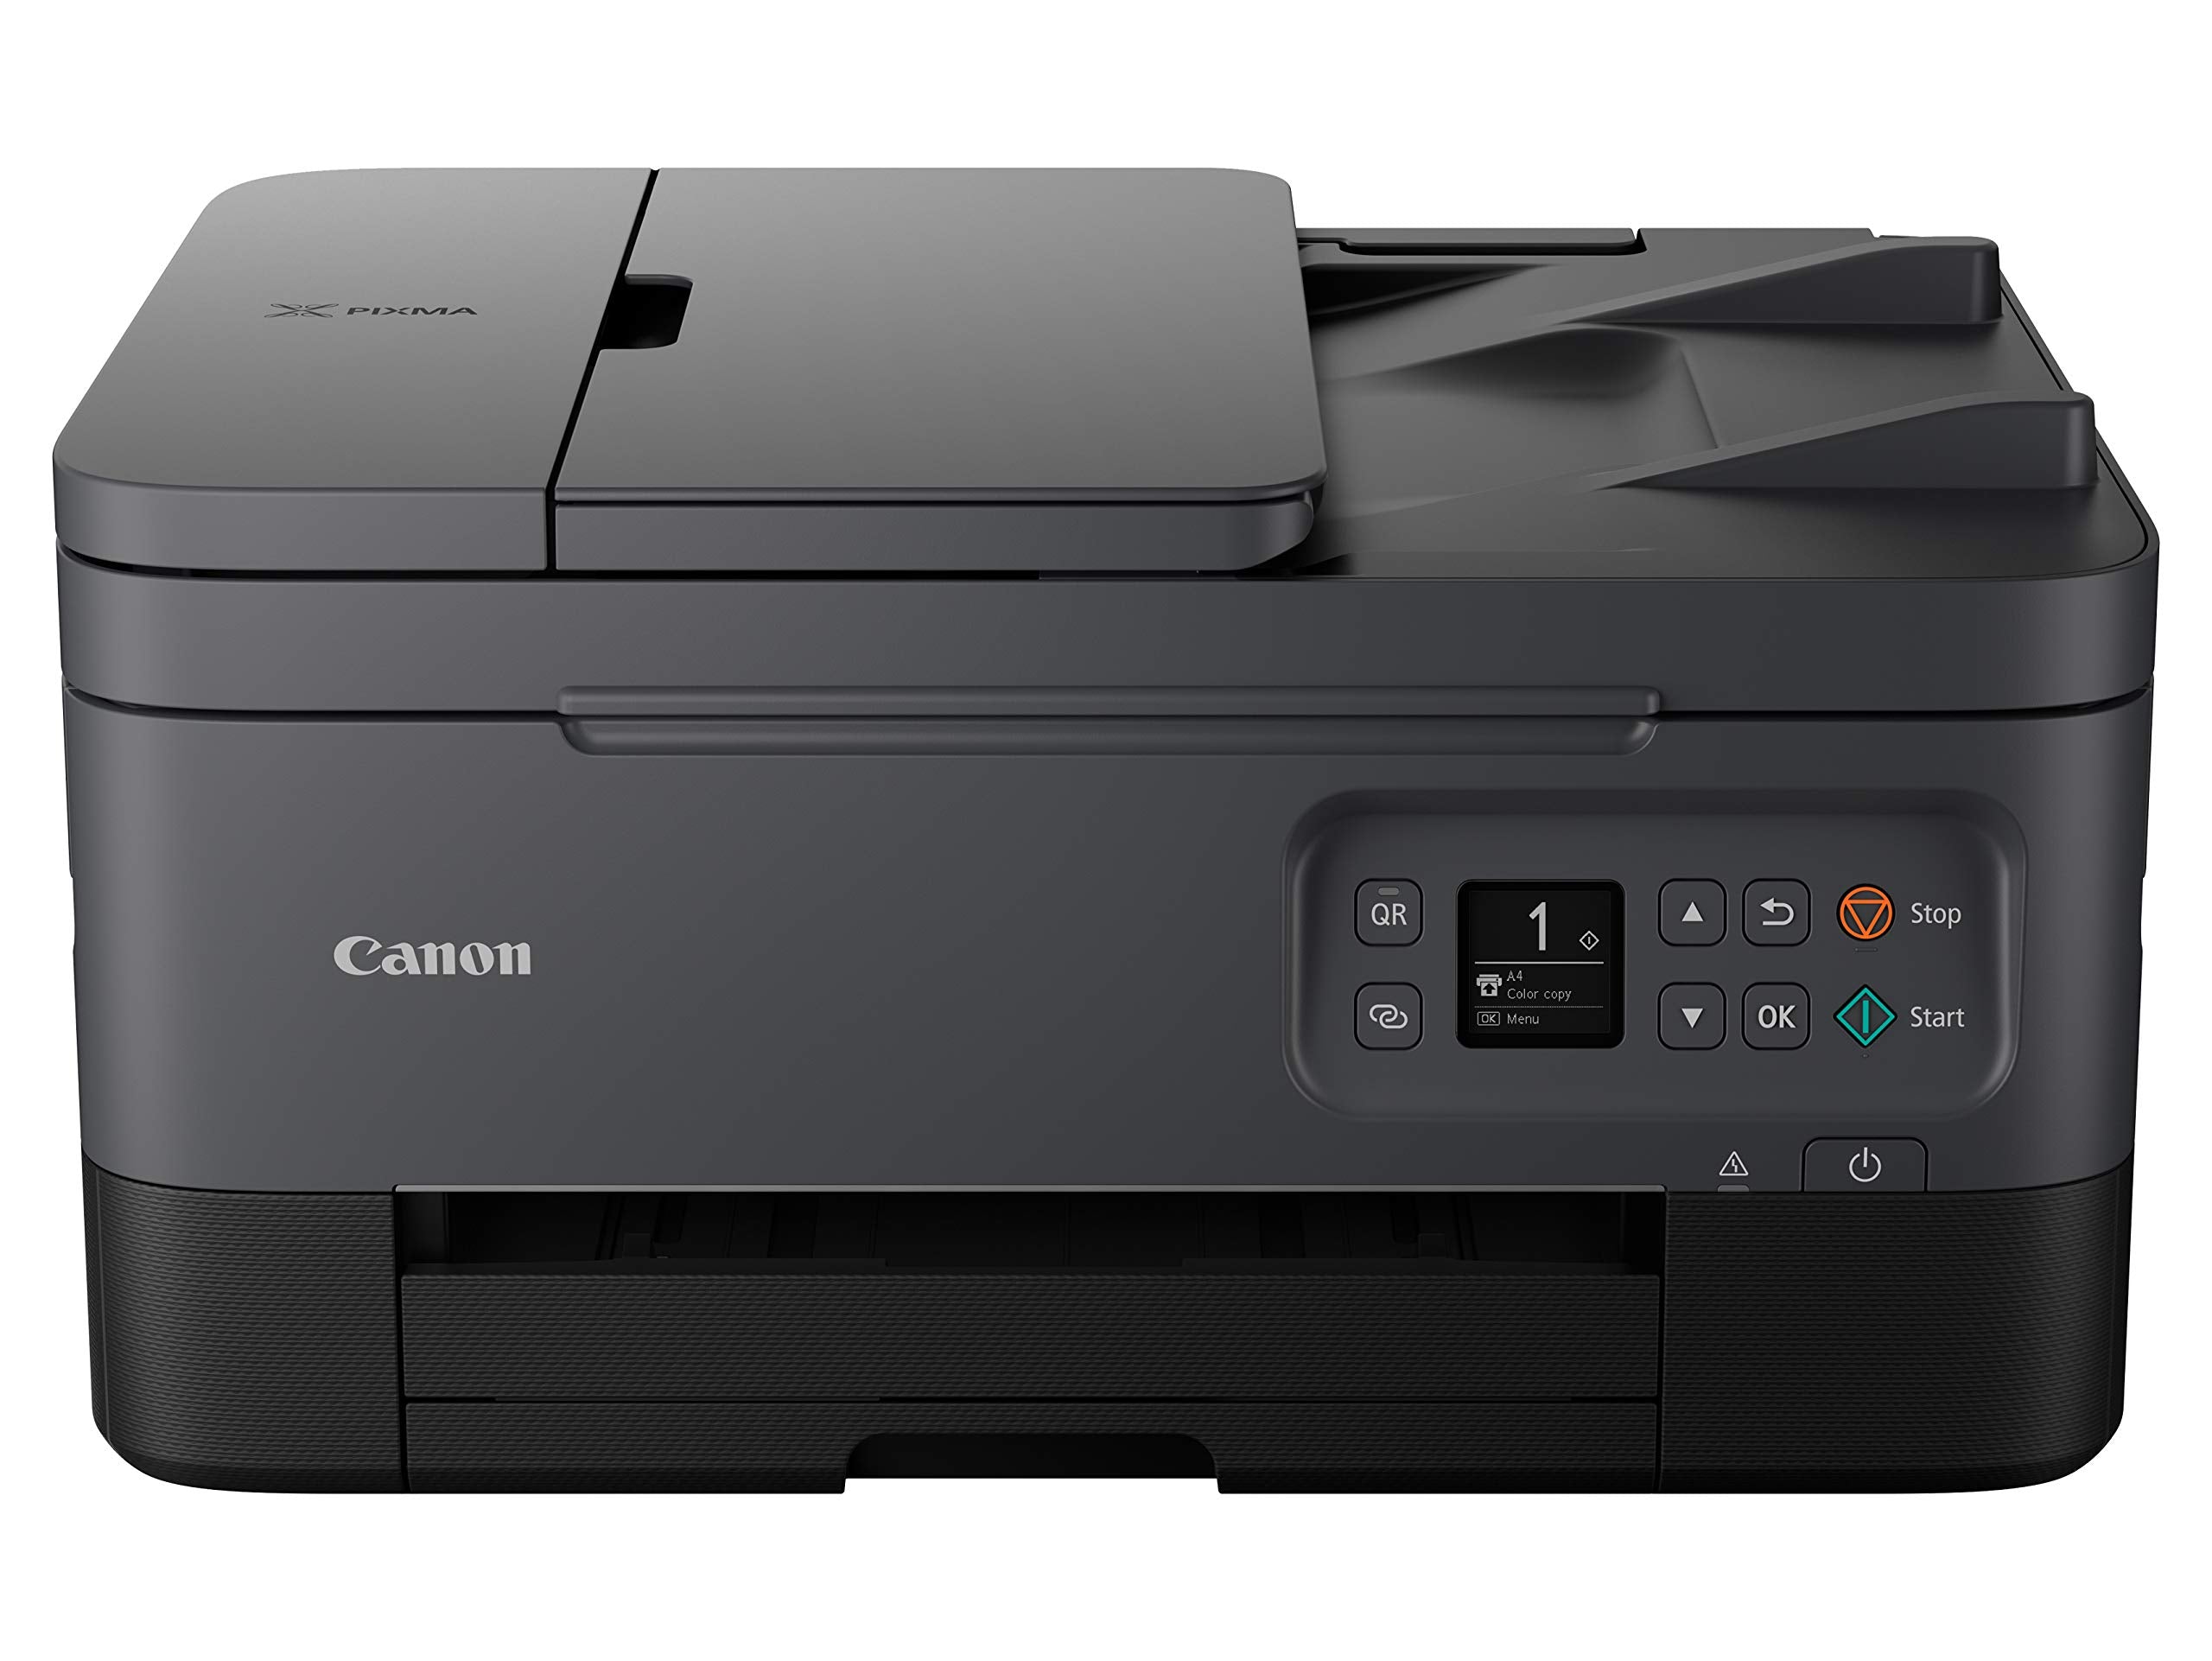 Canon TR7020 All-in-One Wireless Printer for Home Use,Black, Compact (4460C002)  - Very Good